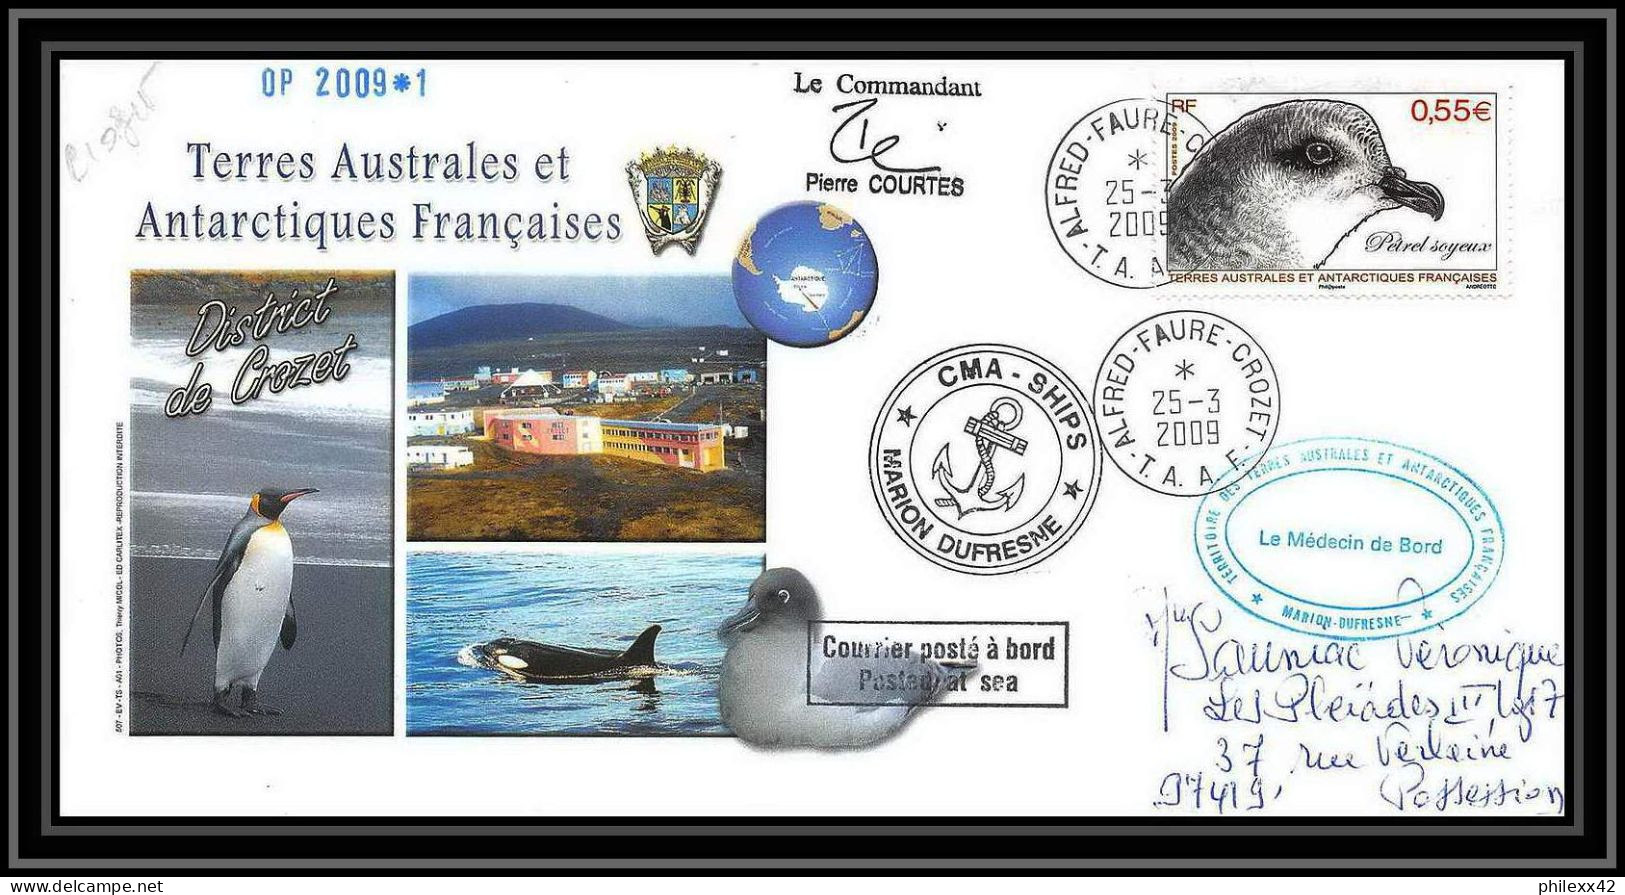 2891 Helilagon Dufresne Signé Signed OP 2009/1 Crozet 25/3/2009 N°534 ANTARCTIC Terres Australes (taaf) Lettre Cover - Helicópteros